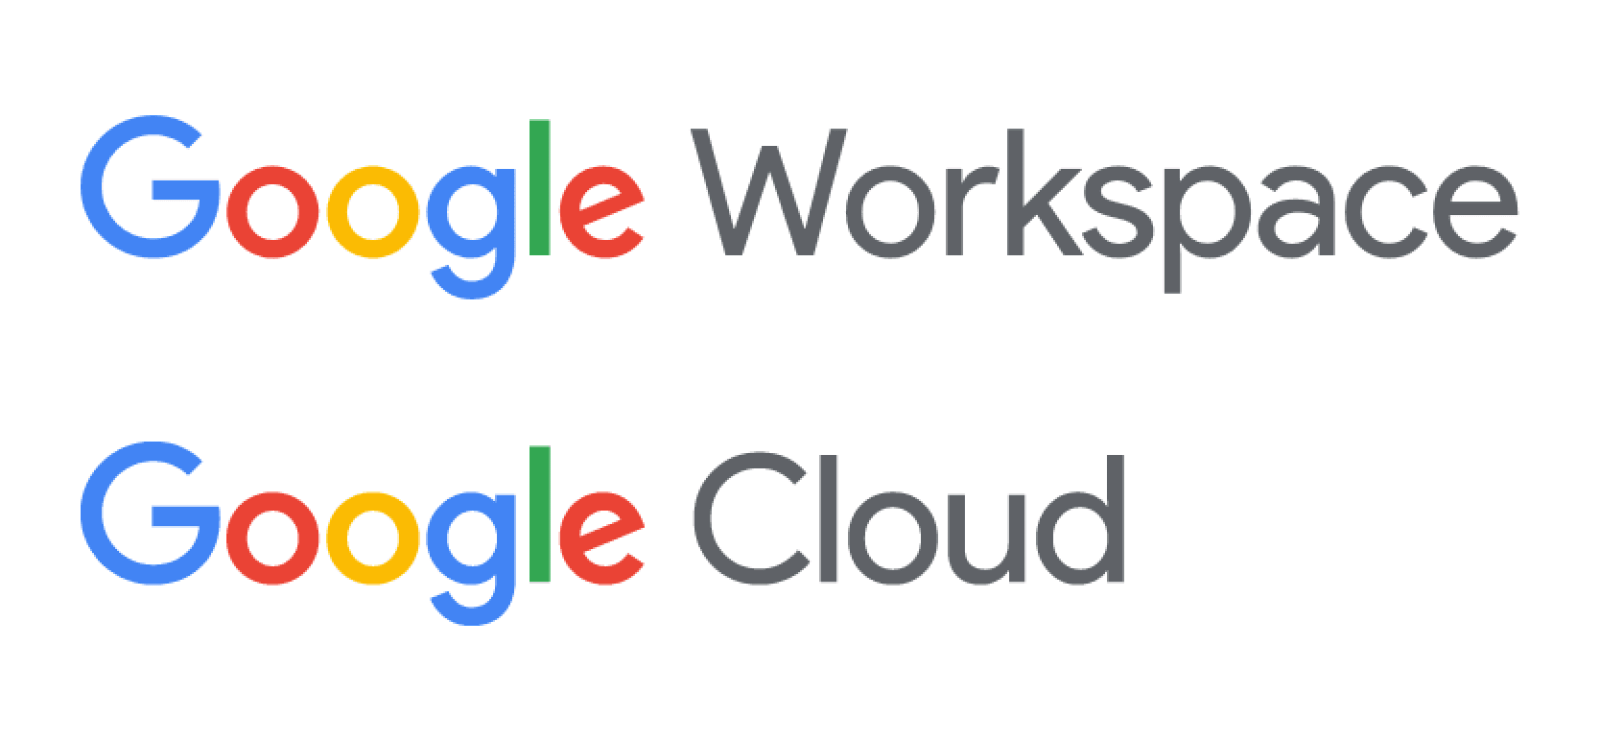 Google offers two powerhouse products that can transform your business: